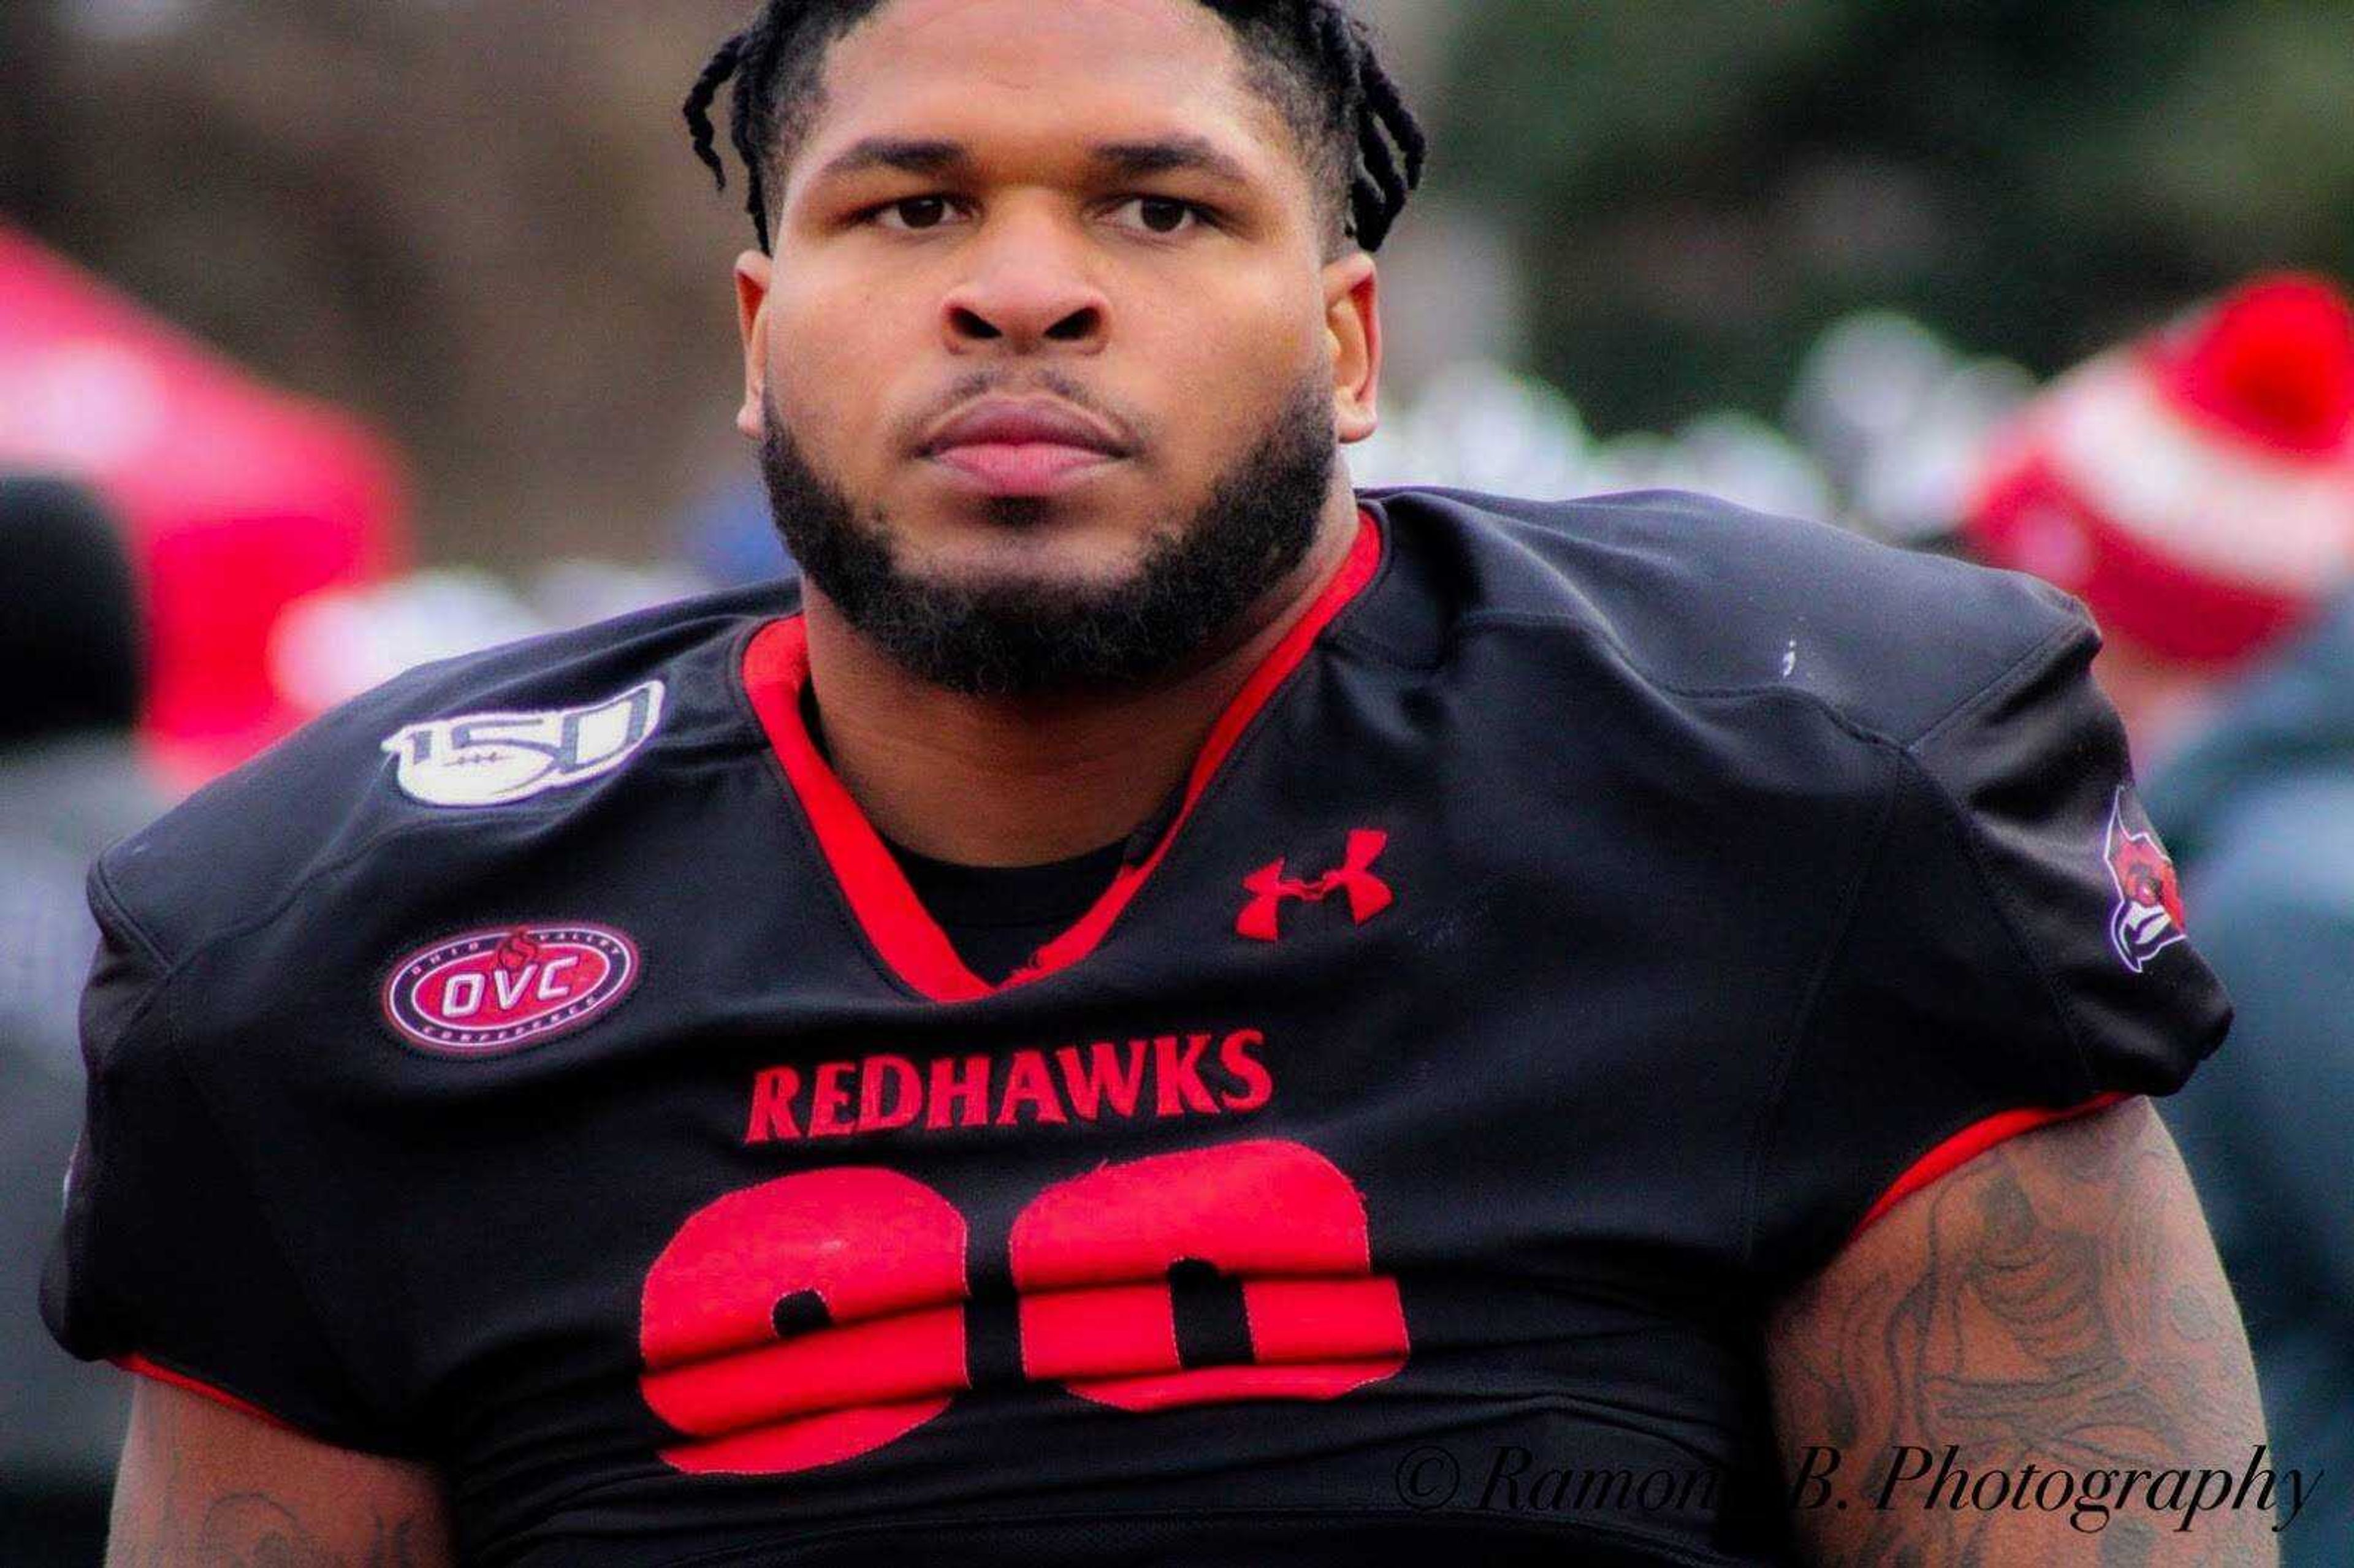 Former Redhawk Josh Avery signed with the Seattle Seahawks on April 25.